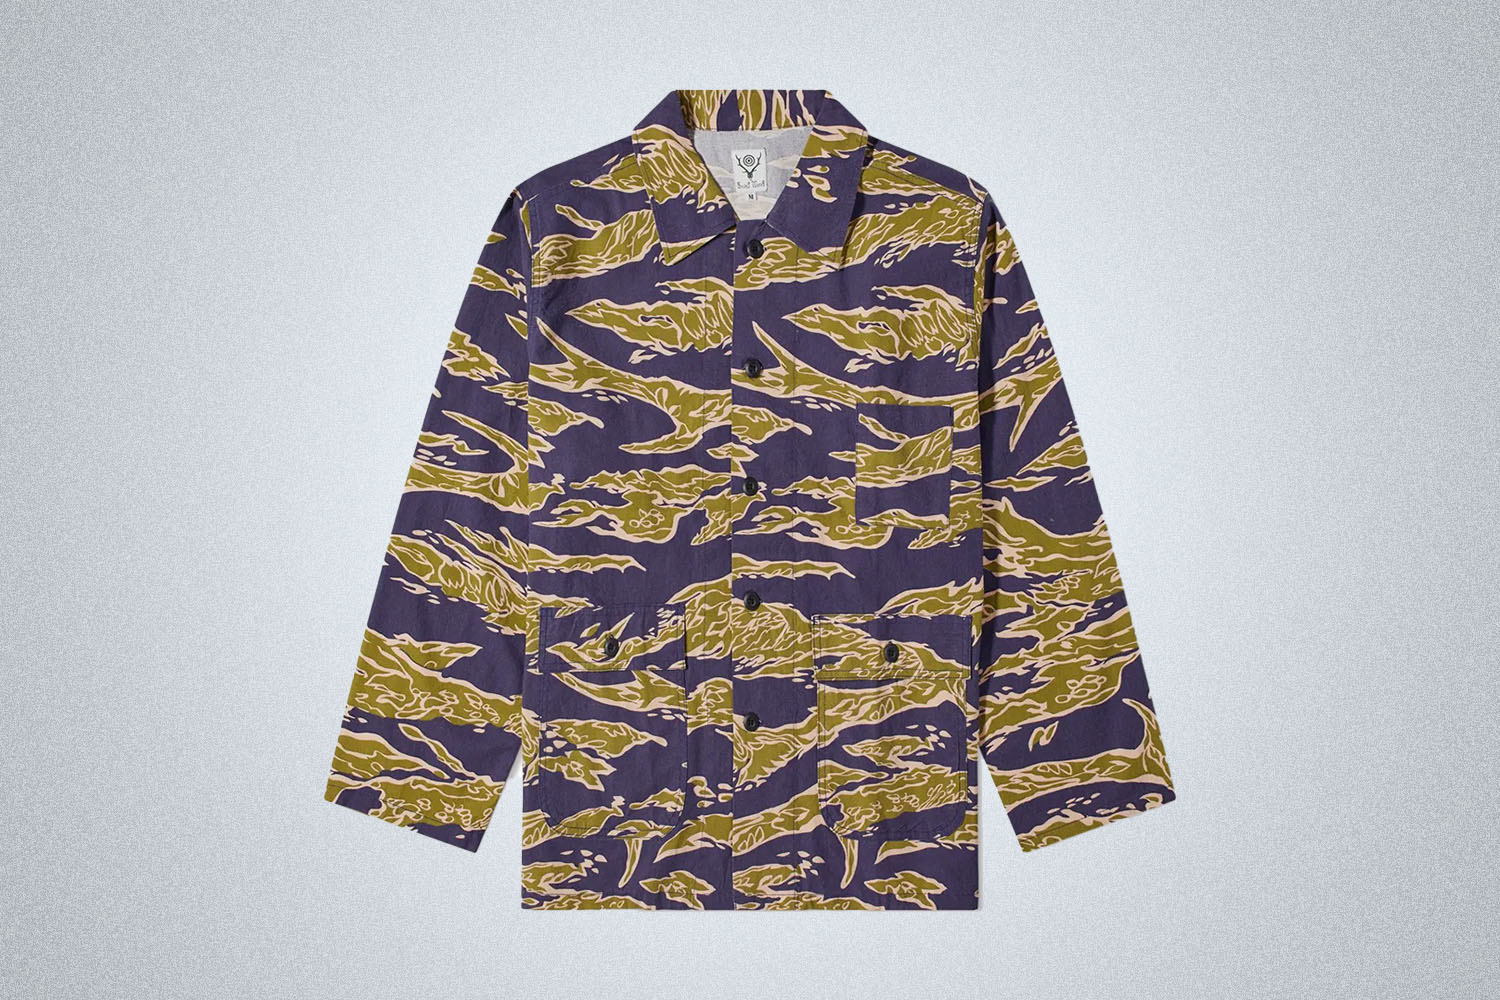 a camo overshirt from South2West8 on a grey background